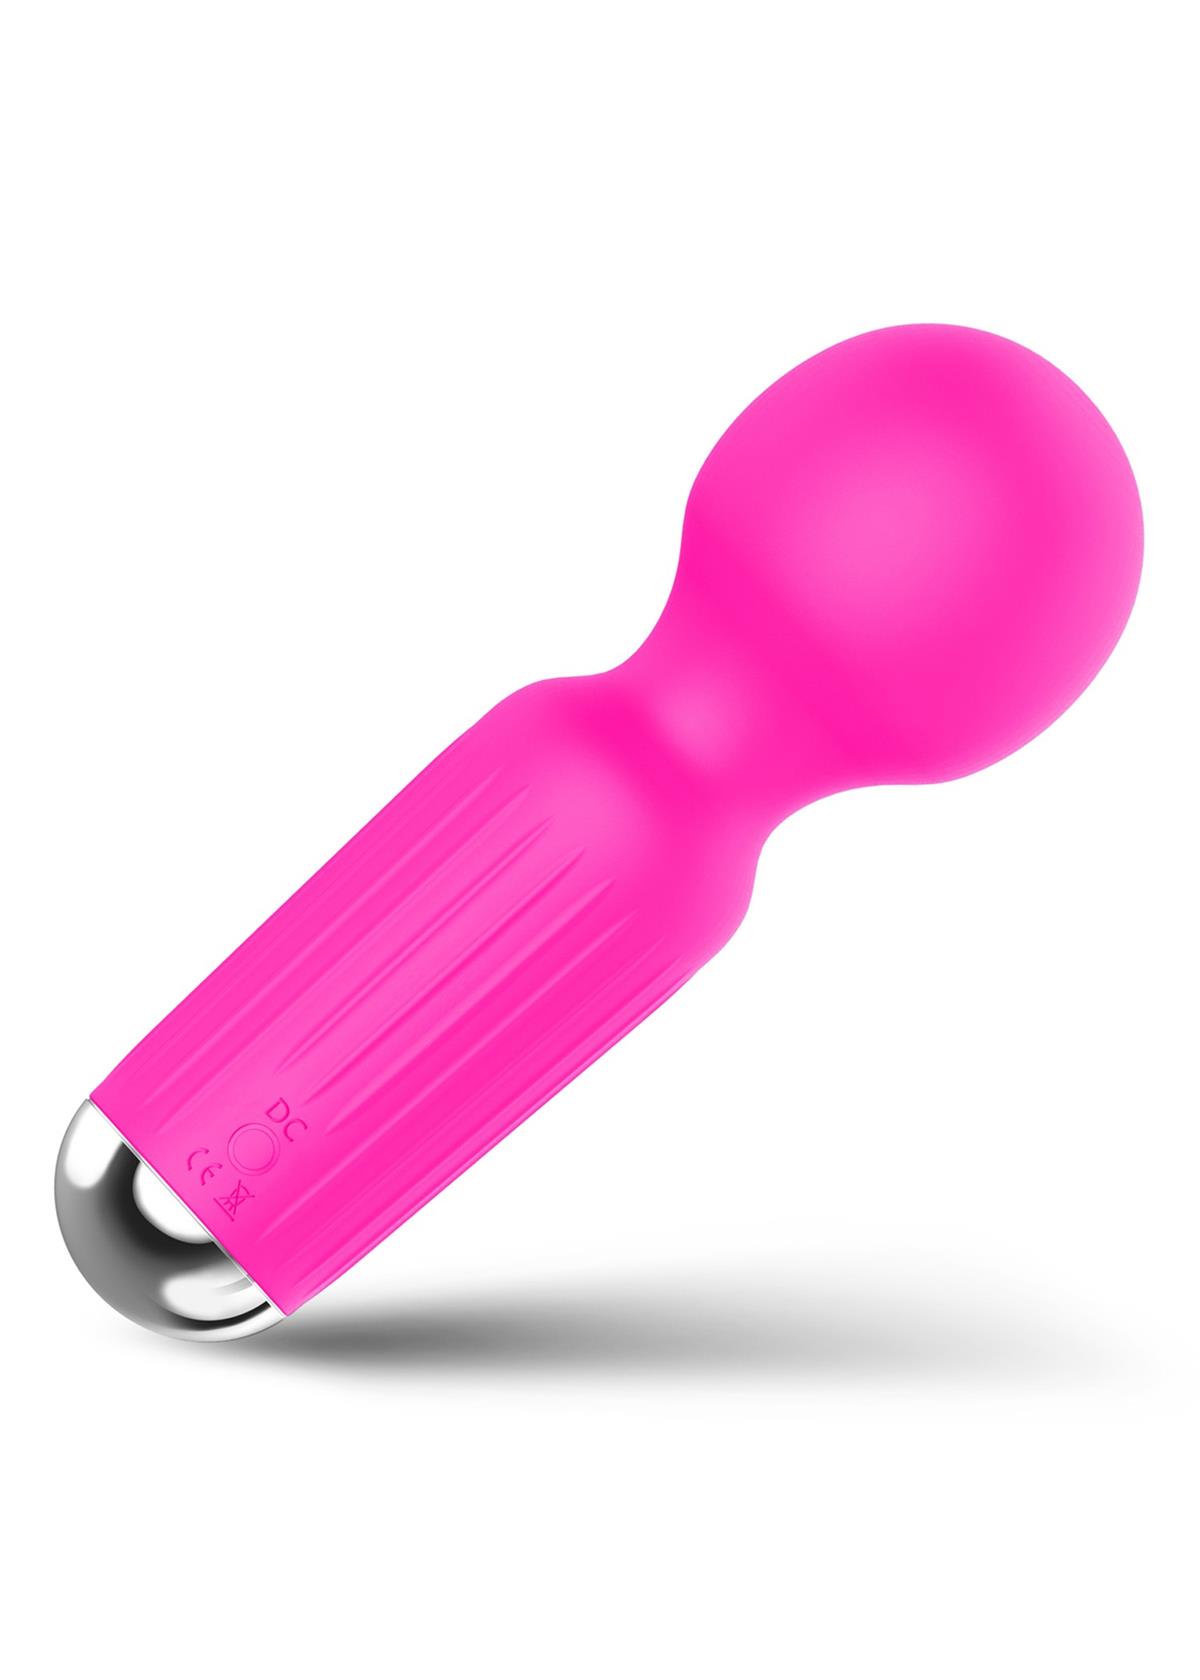 Bossoftoys - 22-00039 - Mini Massager vibrator - 20 Functions - Silicone - 11 cm -  dia 3,7 cm - Rechargeable - attractive Colour windowbox - Pink